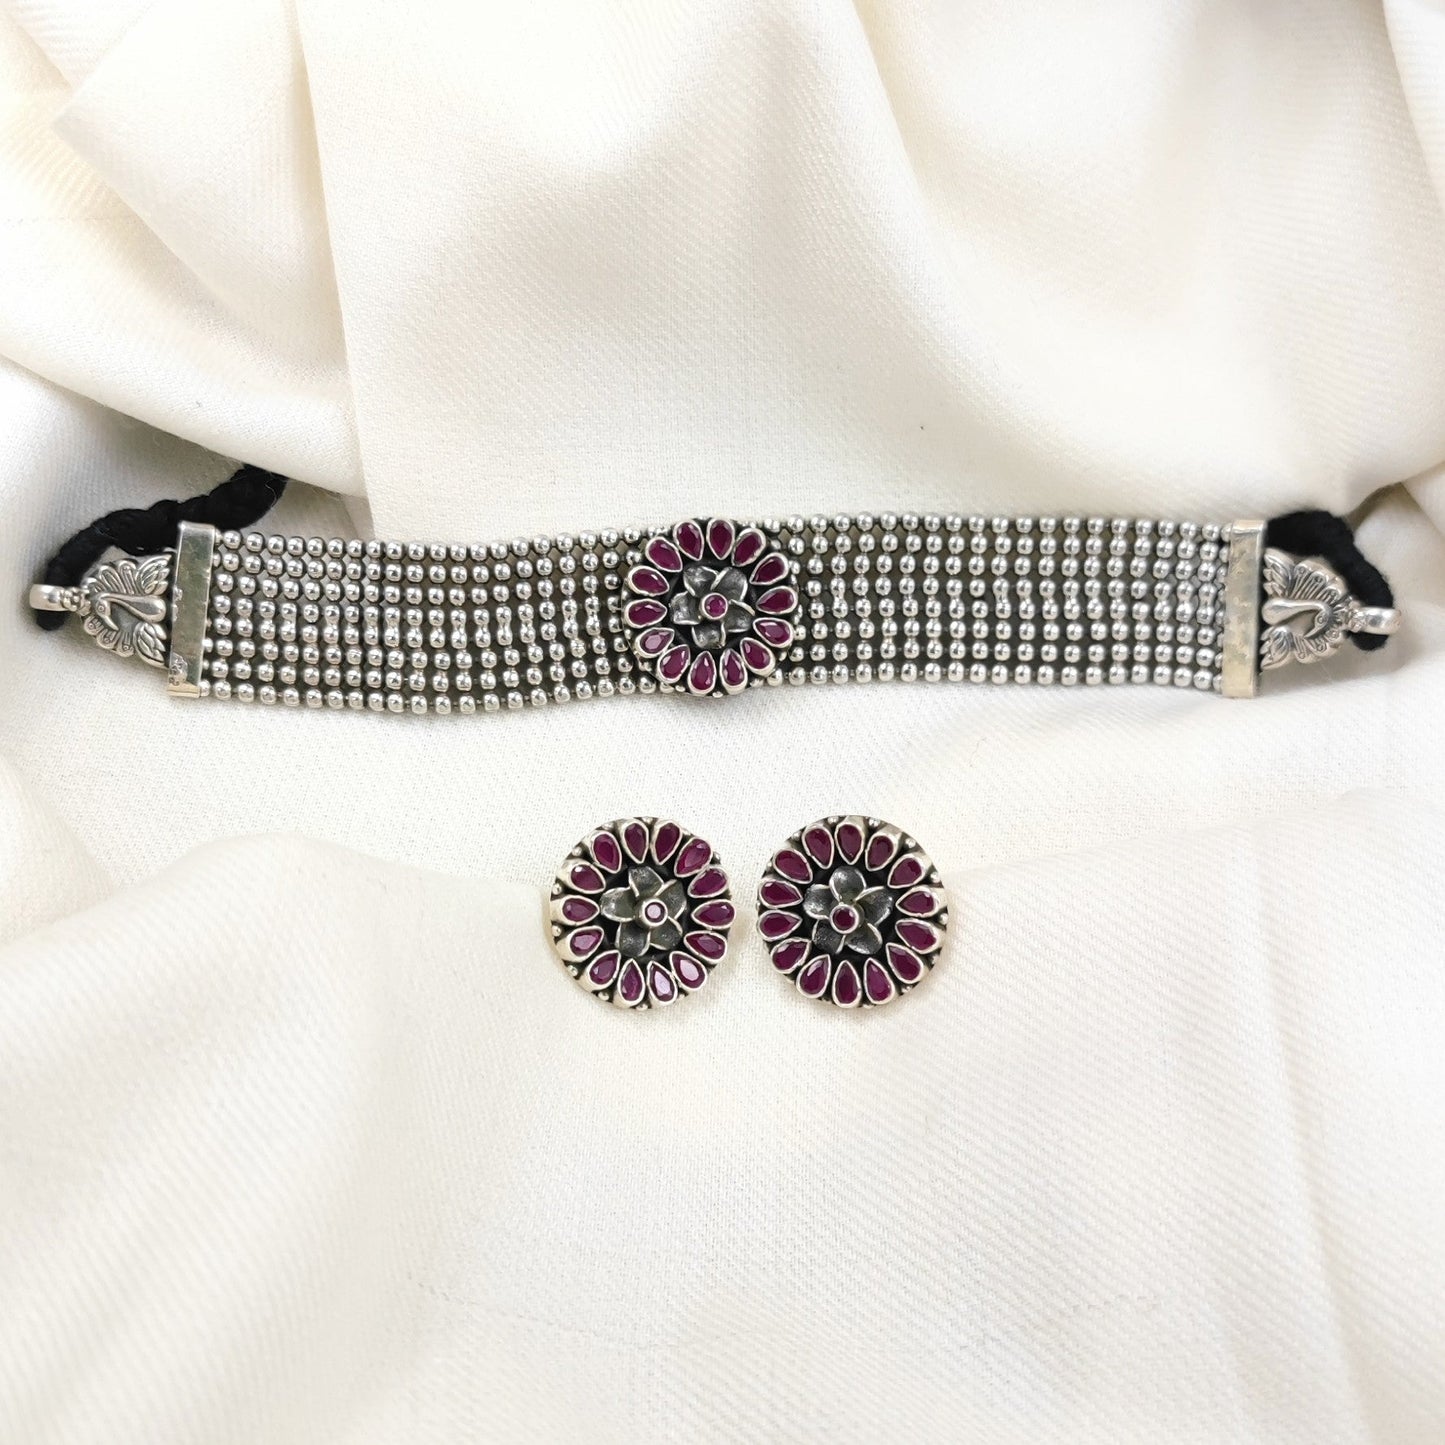 Silver Jewelry Necklace by Jauhri 92.5 Silver - Pink Collar Choker With Earrings